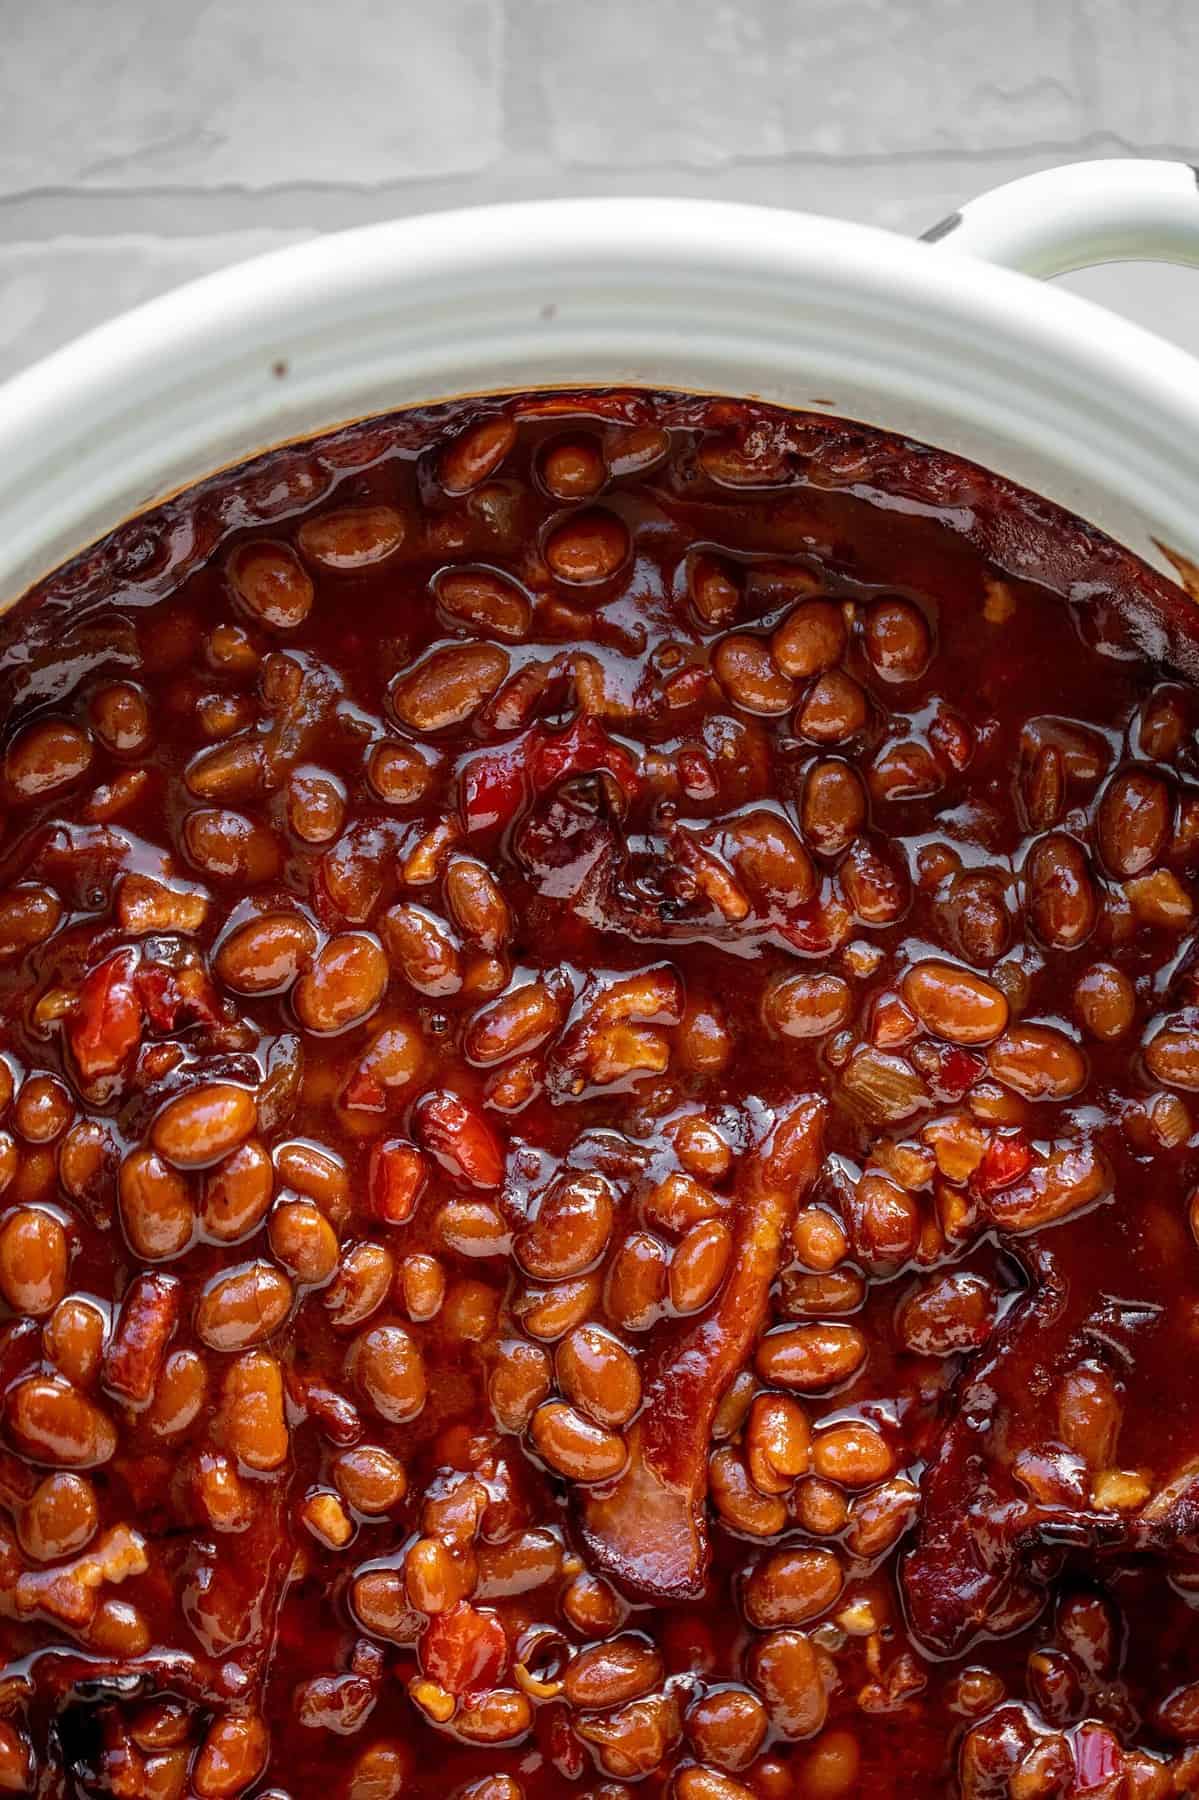  These saucy cowboy beans are truly the stars of the show.